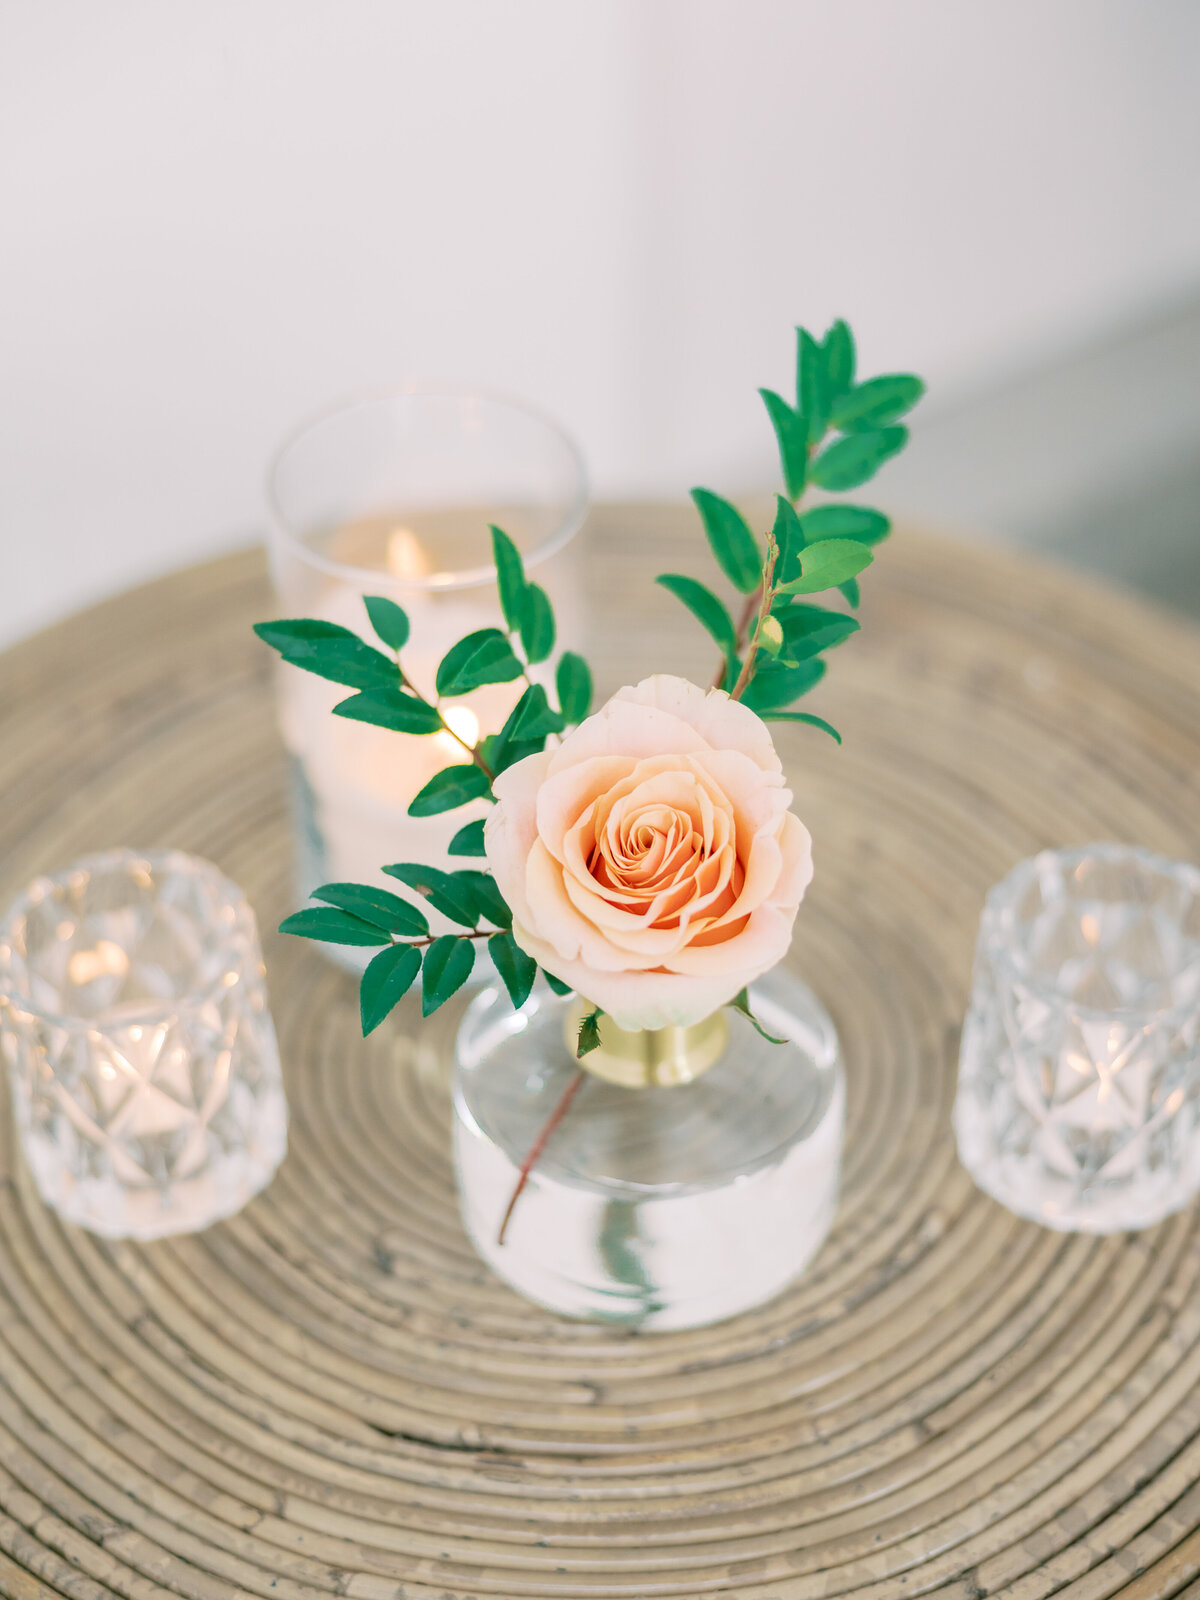 Small vases with simple floral designs and candles.